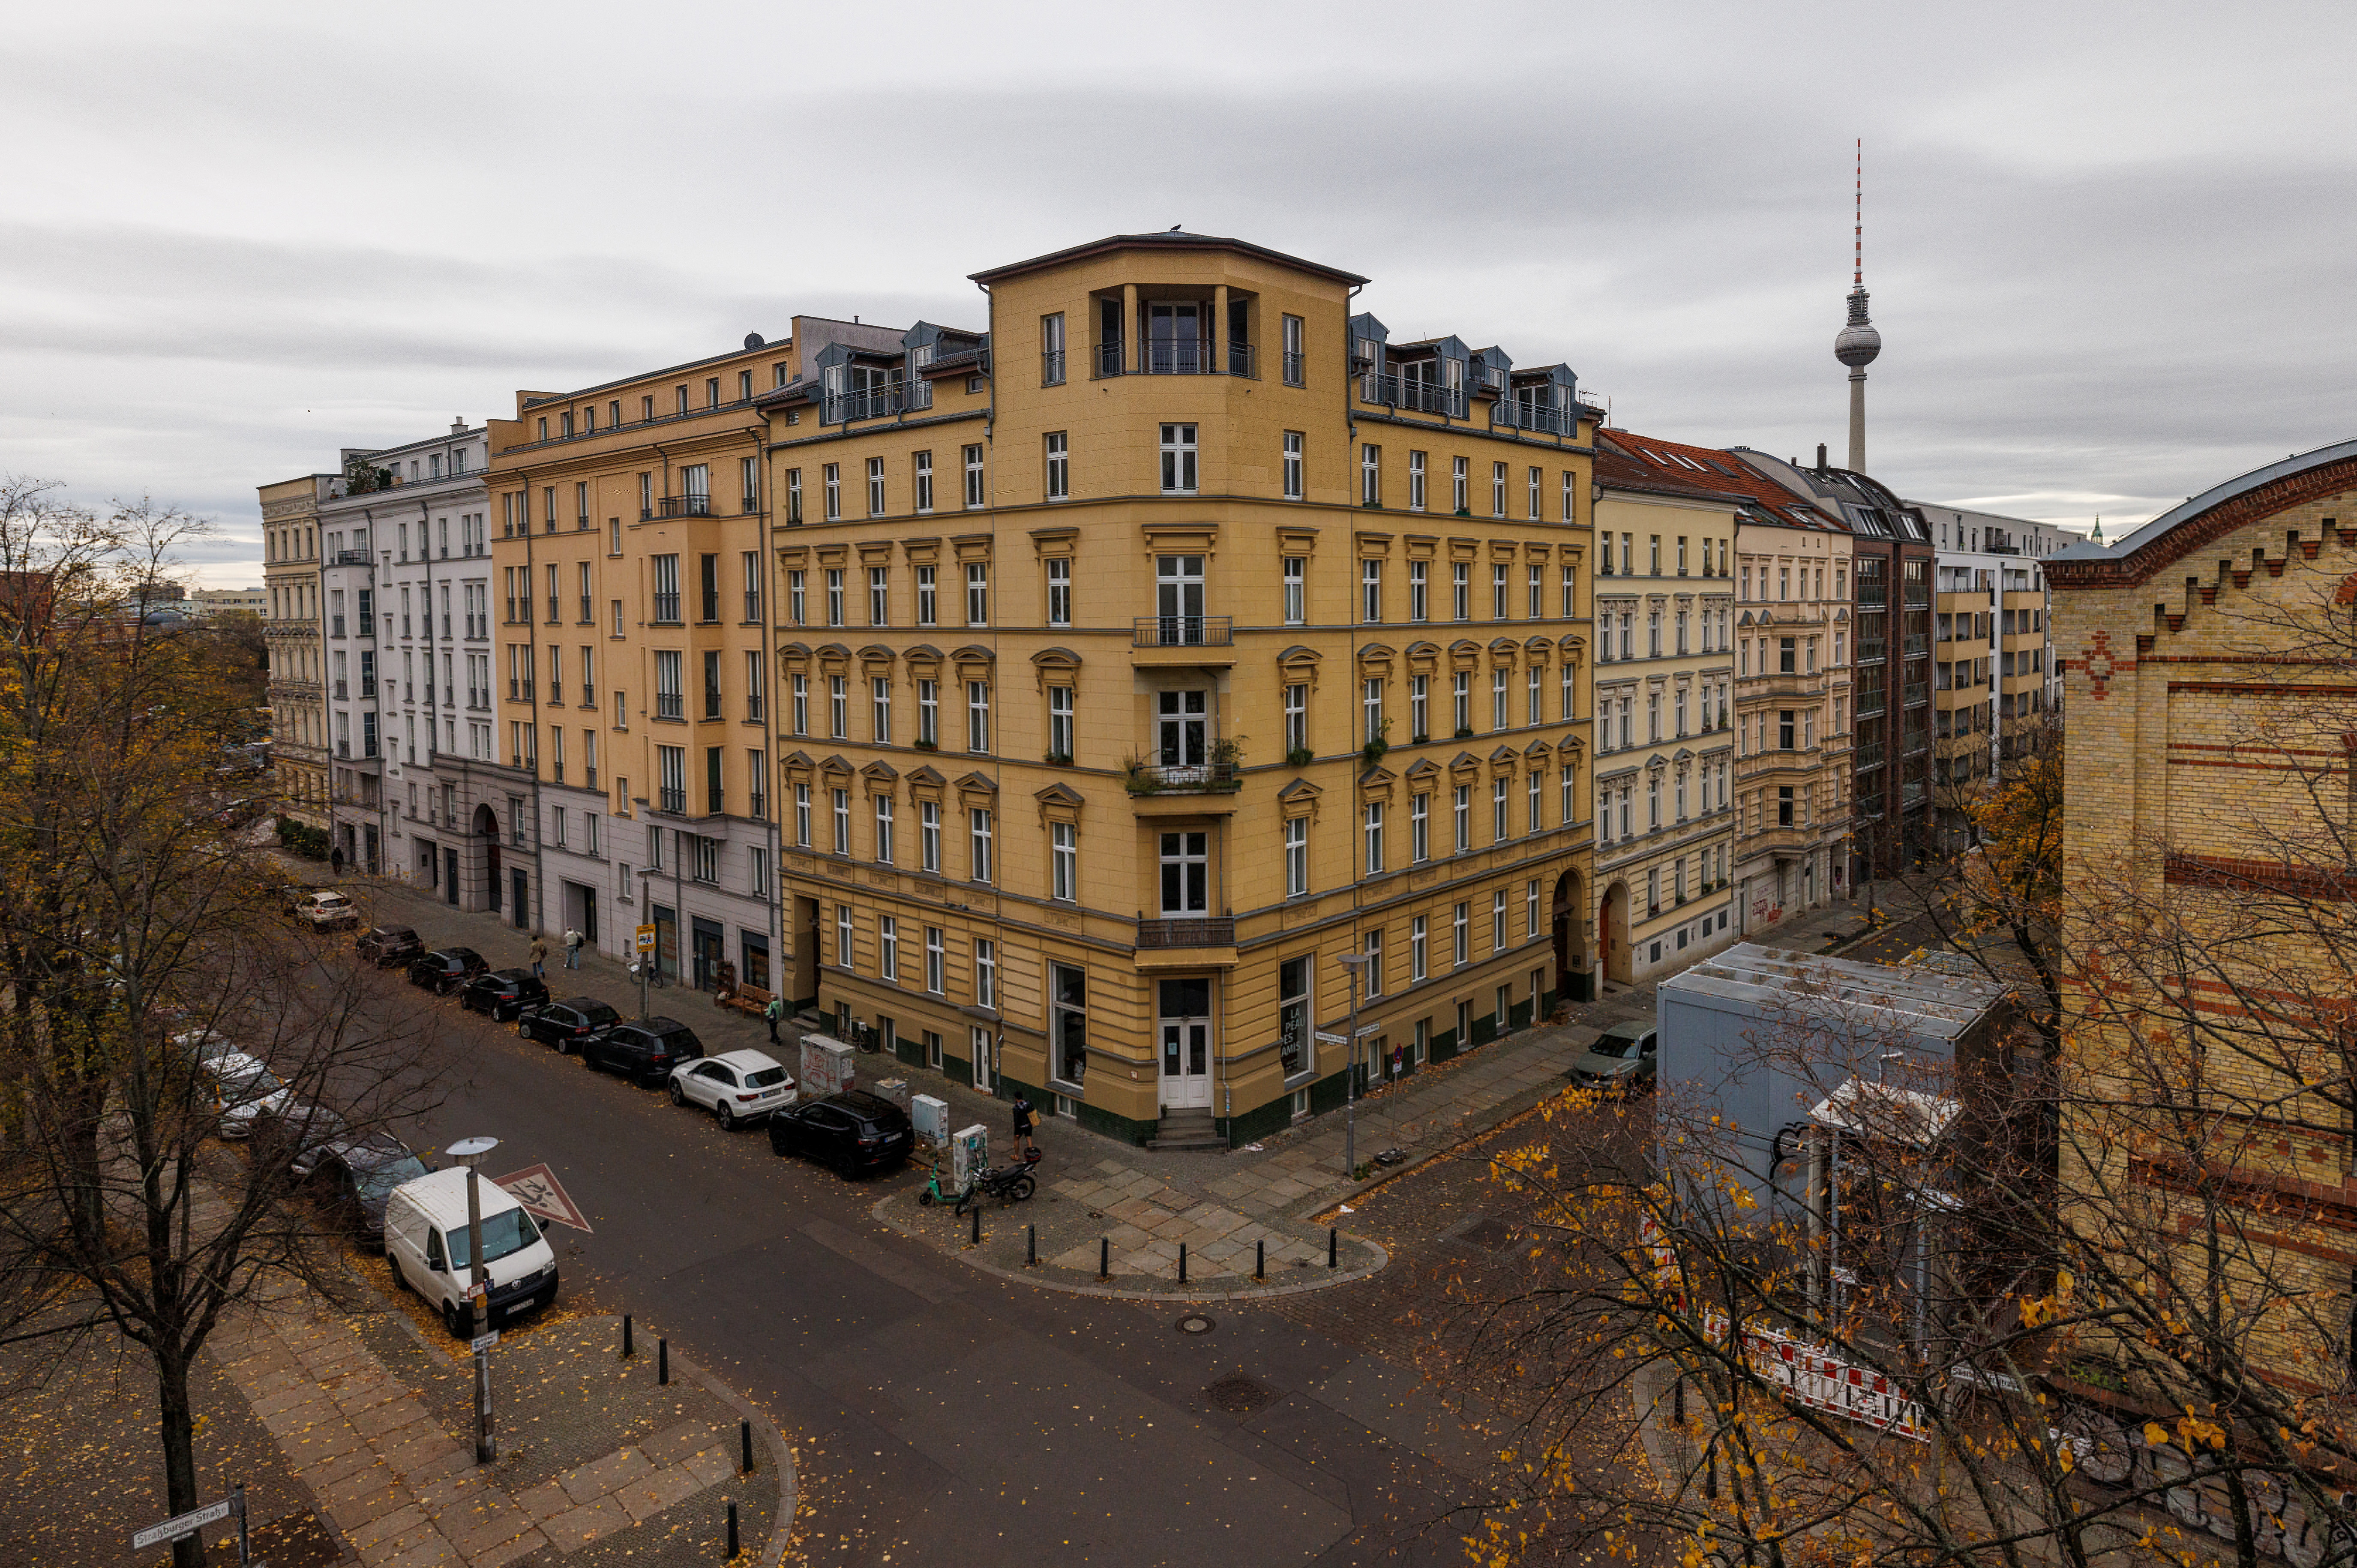 Berlin's renters face more misery as housing crisis deepens